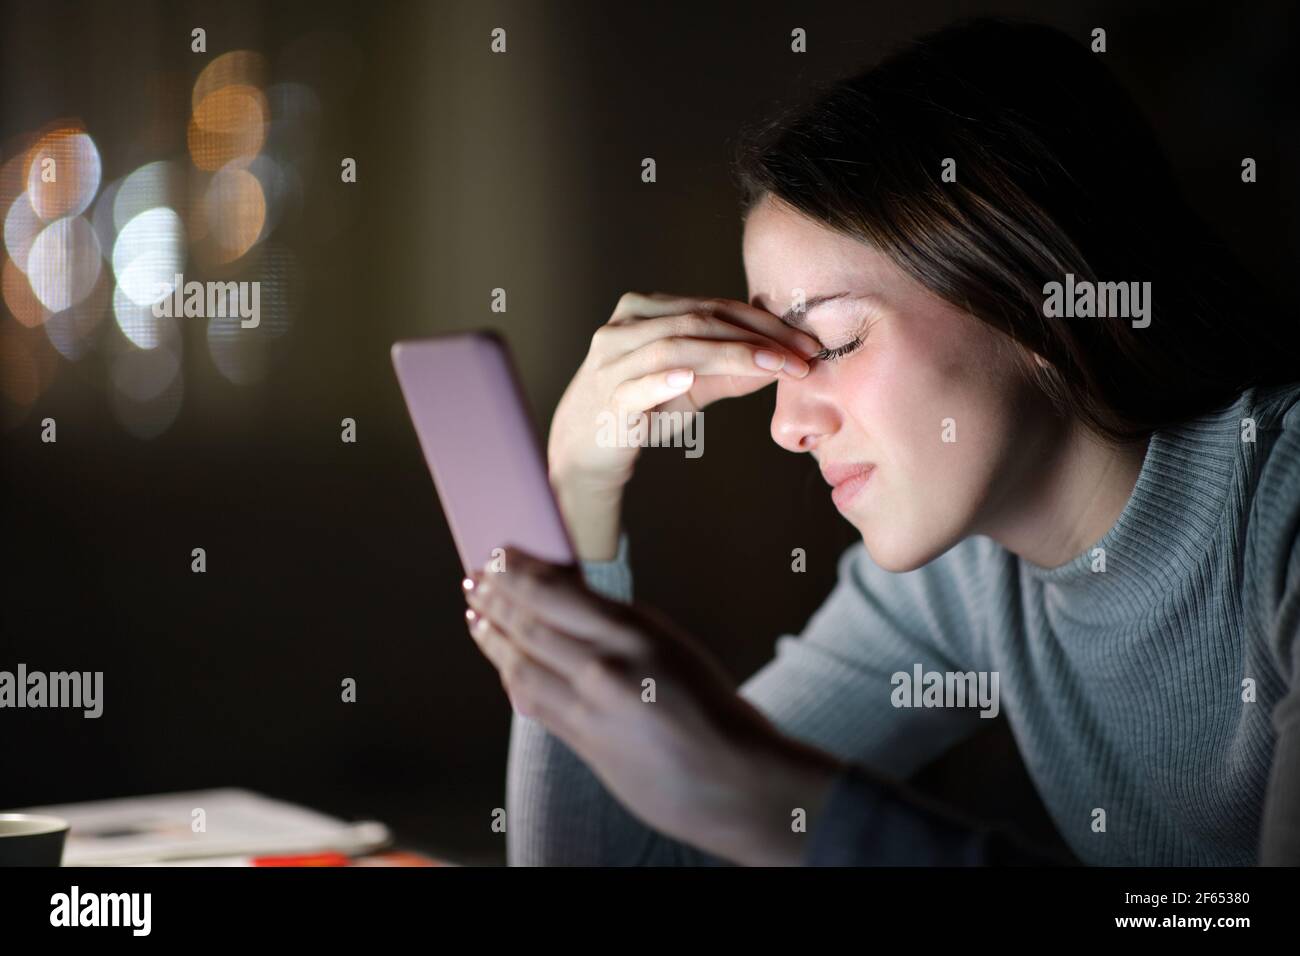 Tired woman suffering eyestrain using mobile phone in the night at home Stock Photo